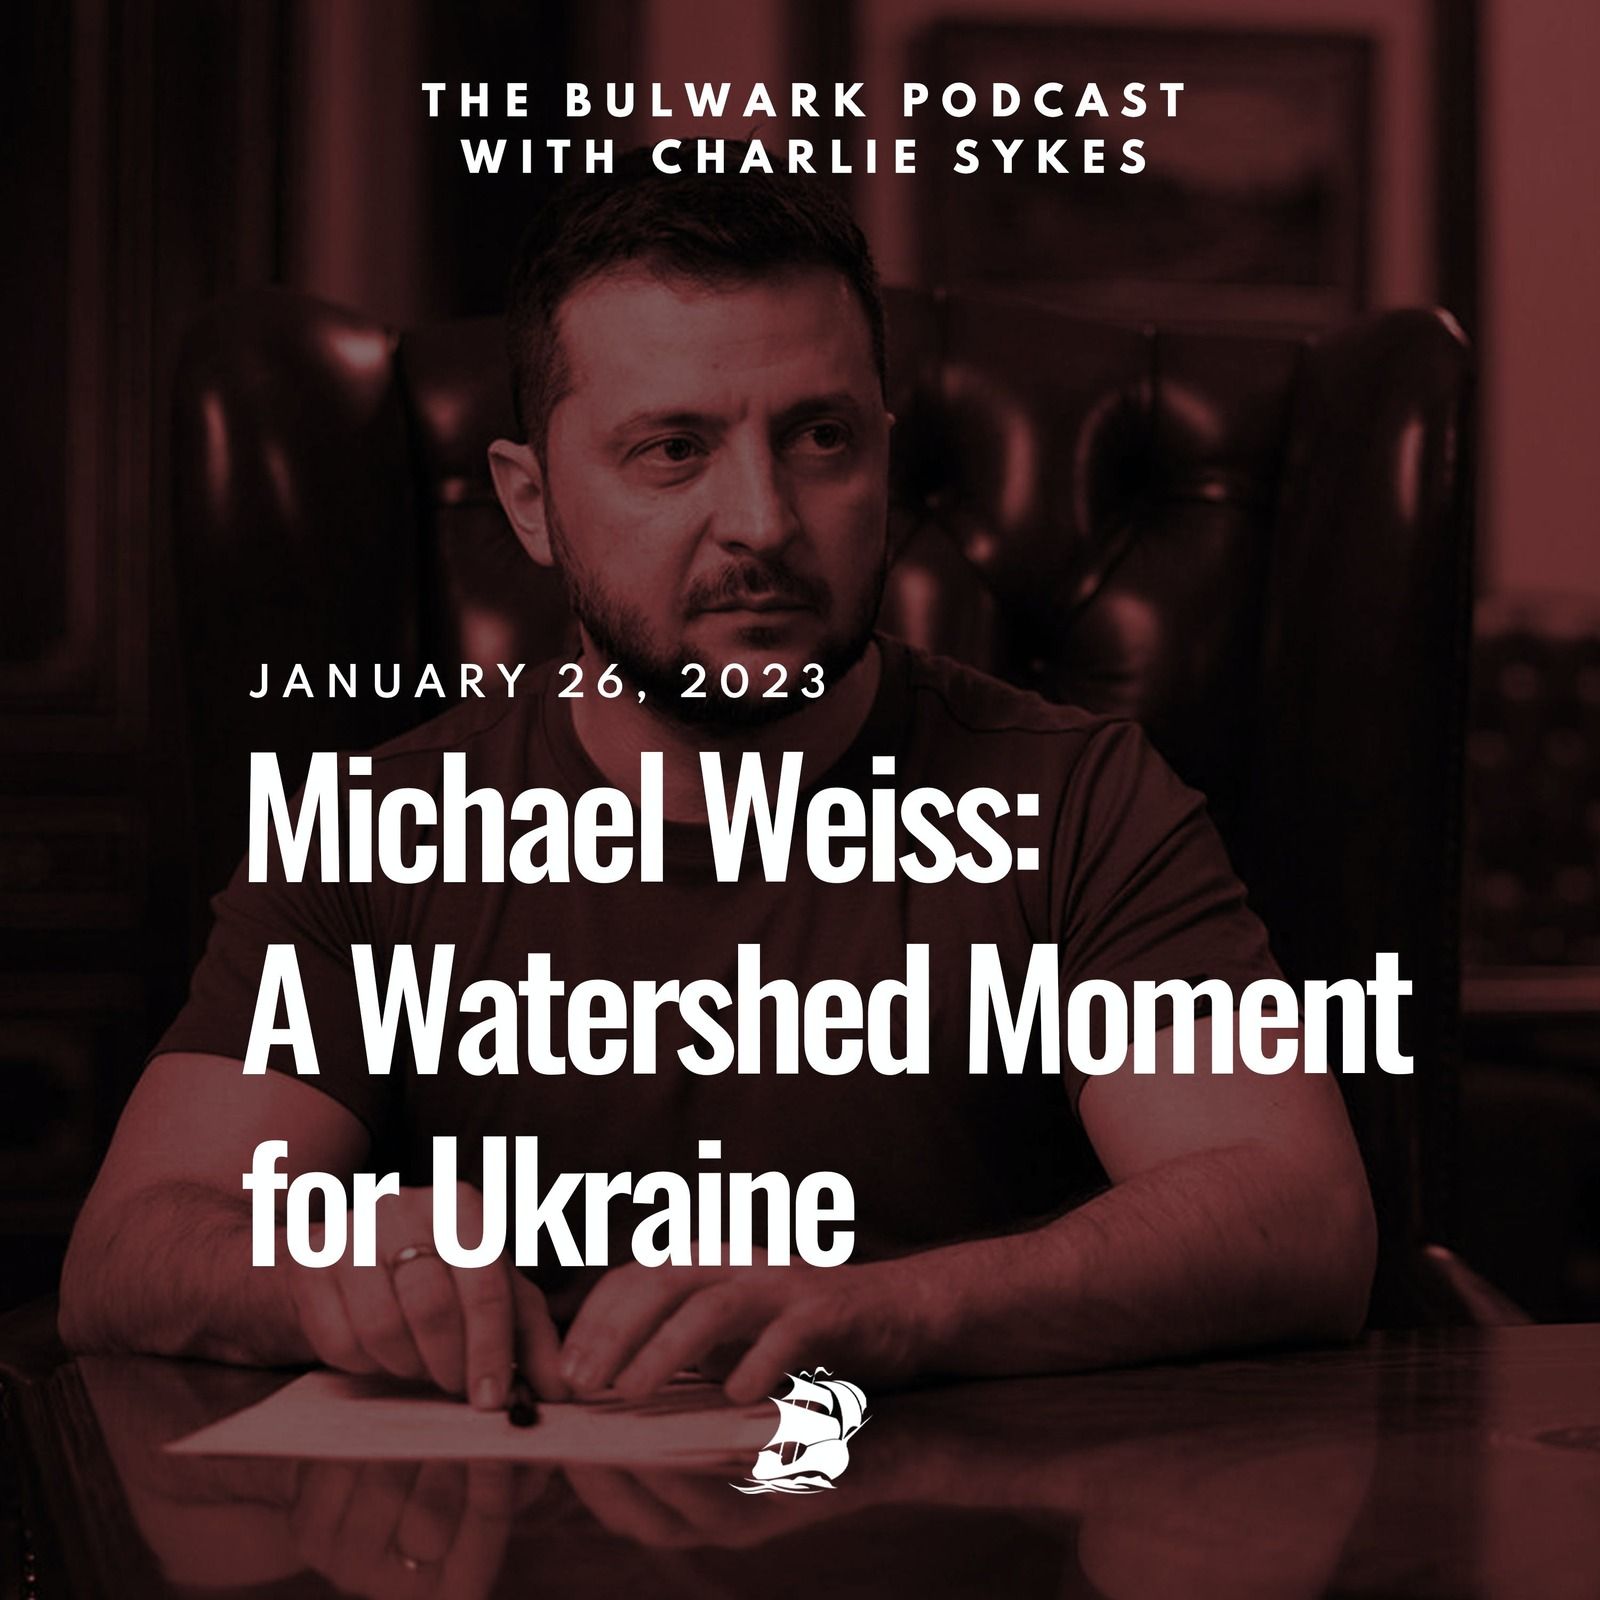 Michael Weiss: A Watershed Moment for Ukraine